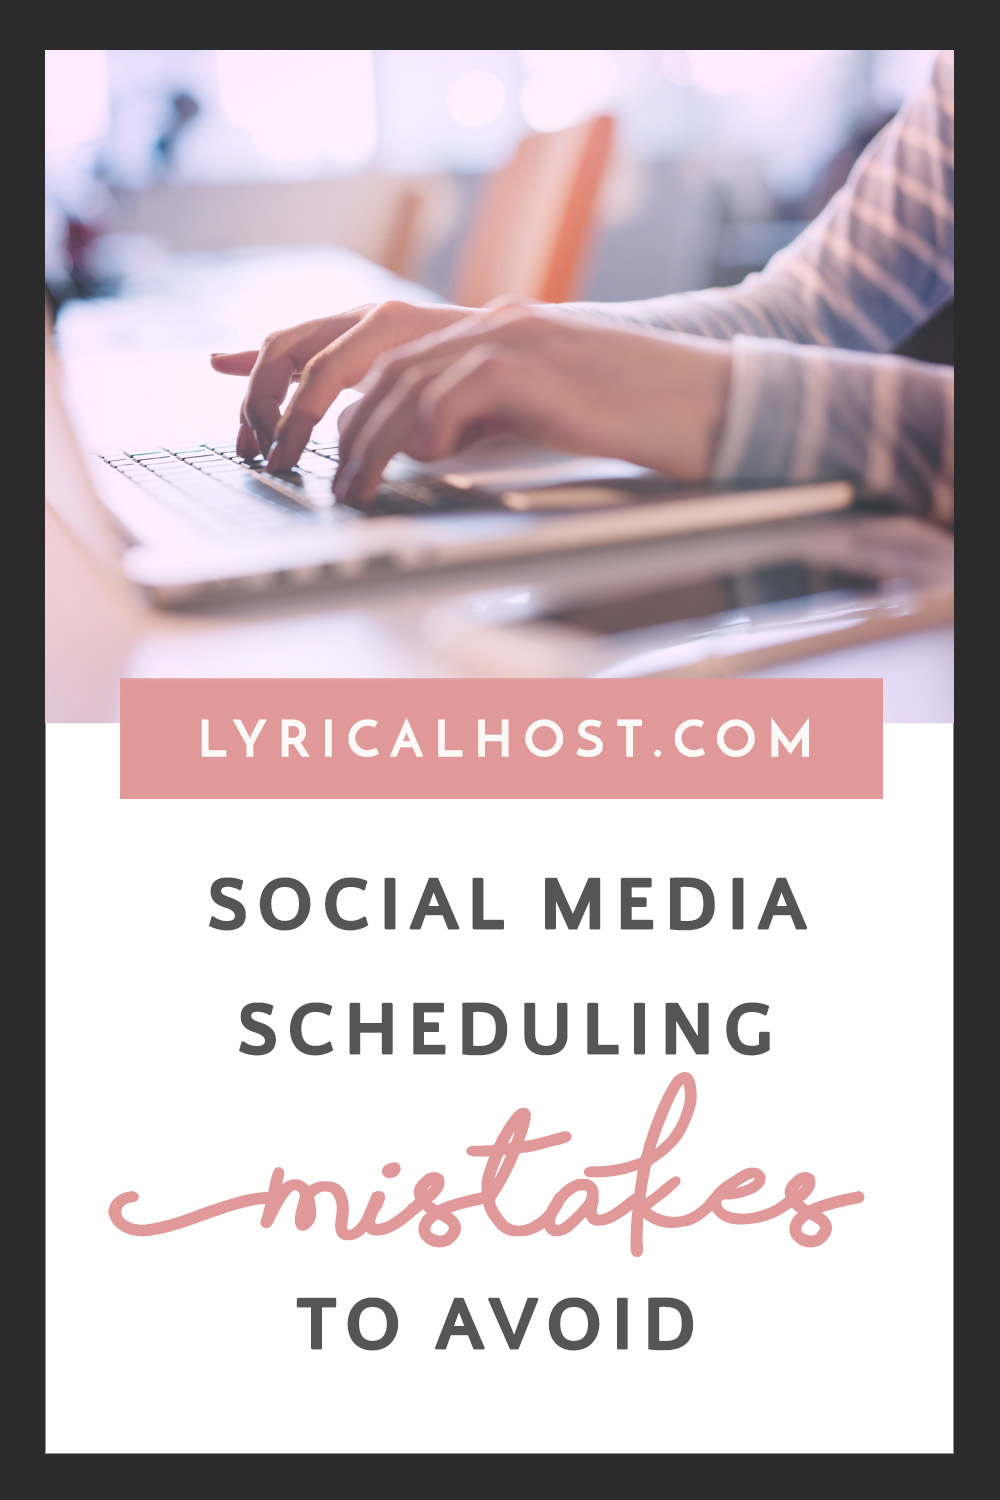 Common social media scheduling mistakes to avoid